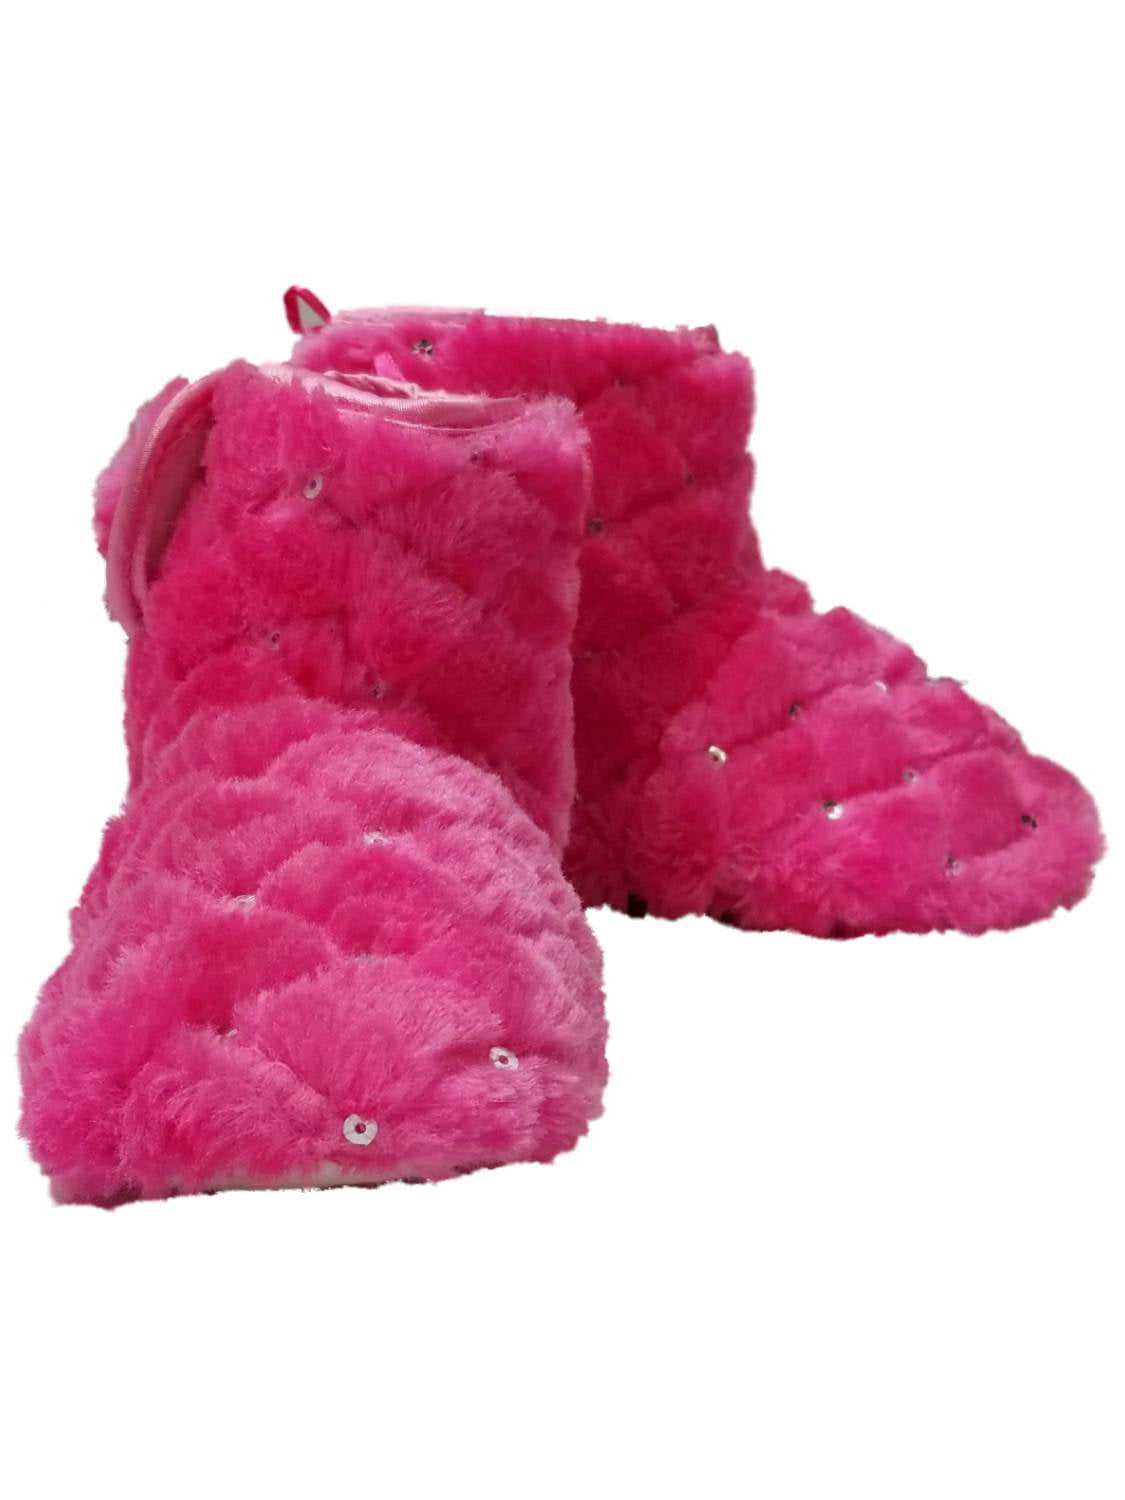 NEW* Girls Sequin Pink or Cream Plush Slipper Boots in 4 sizes 